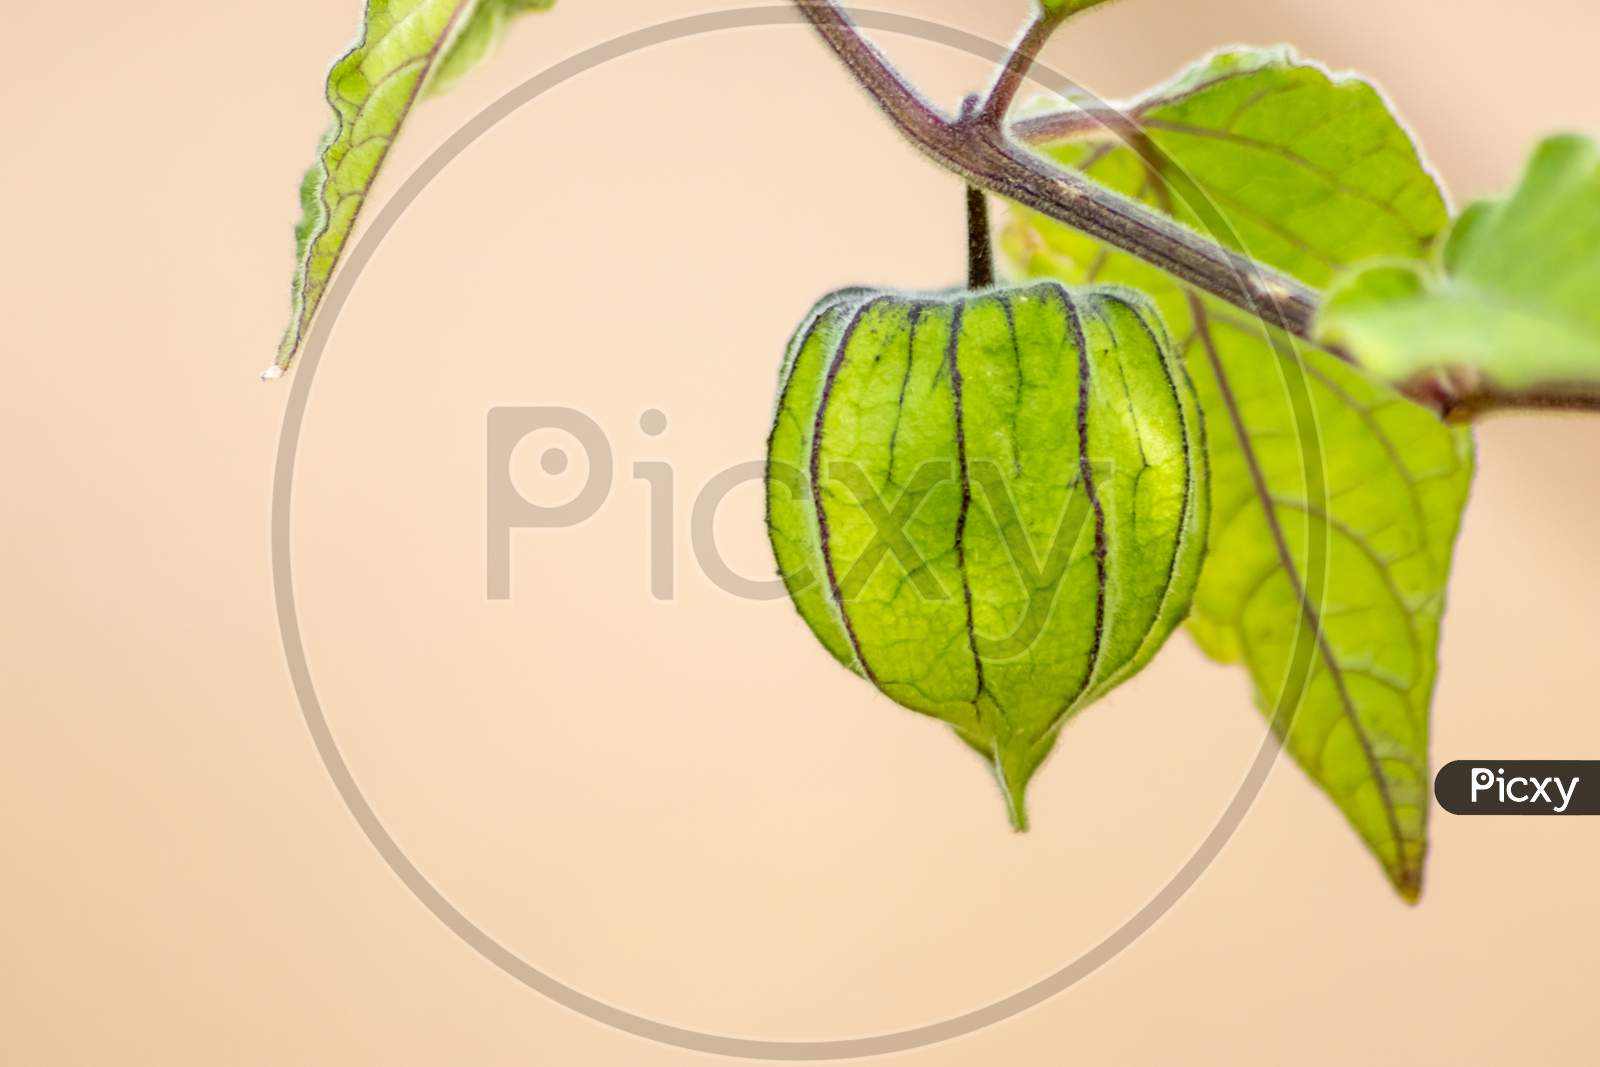 Beautiful green physalis ripening as home grown healthy fruit with filigree veins of the green physalis shell shows translucent organic fruit cage as macro closeup